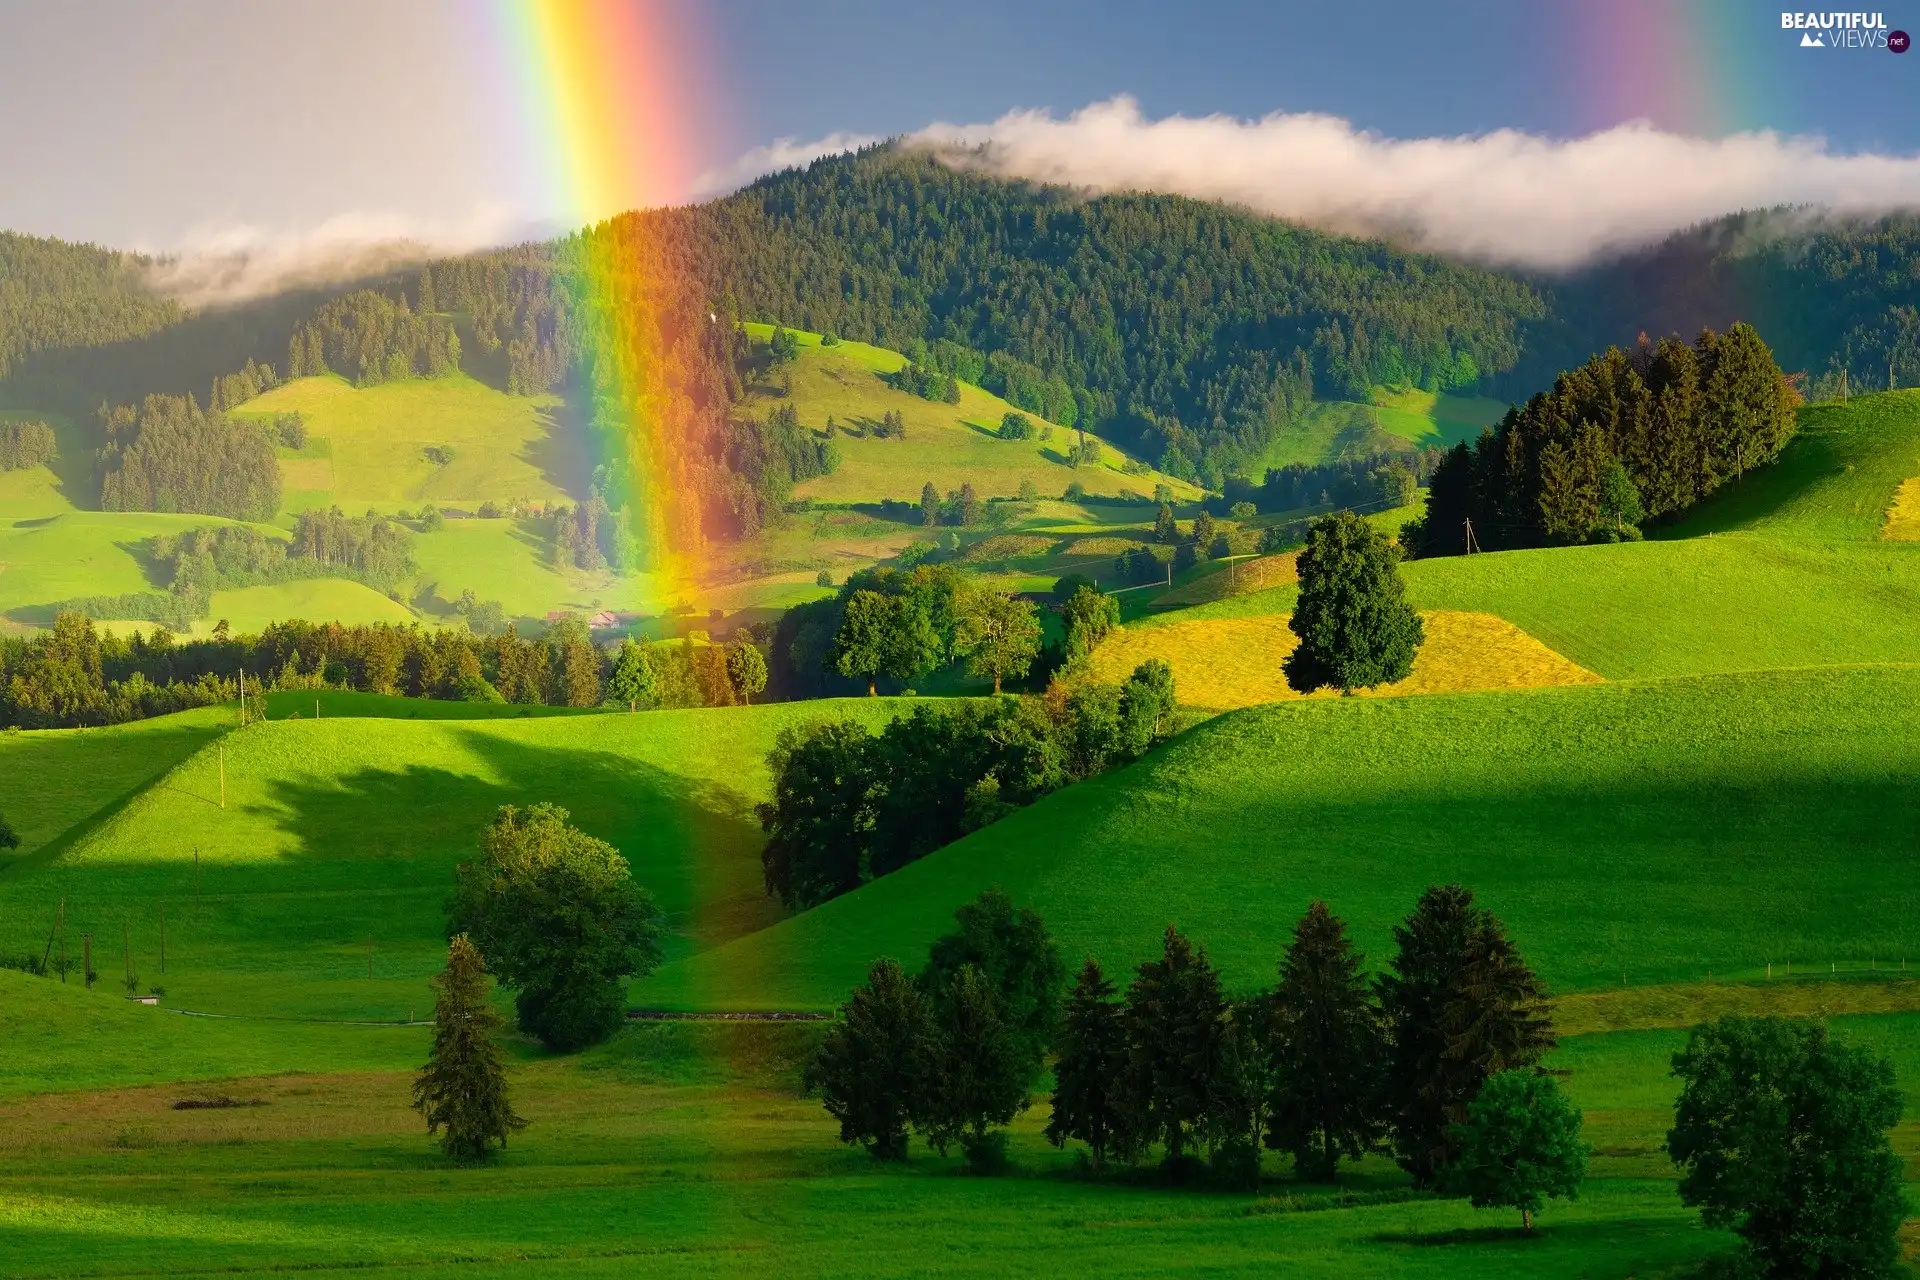 The Hills, forest, viewes, Mountains, Great Rainbows, trees, summer